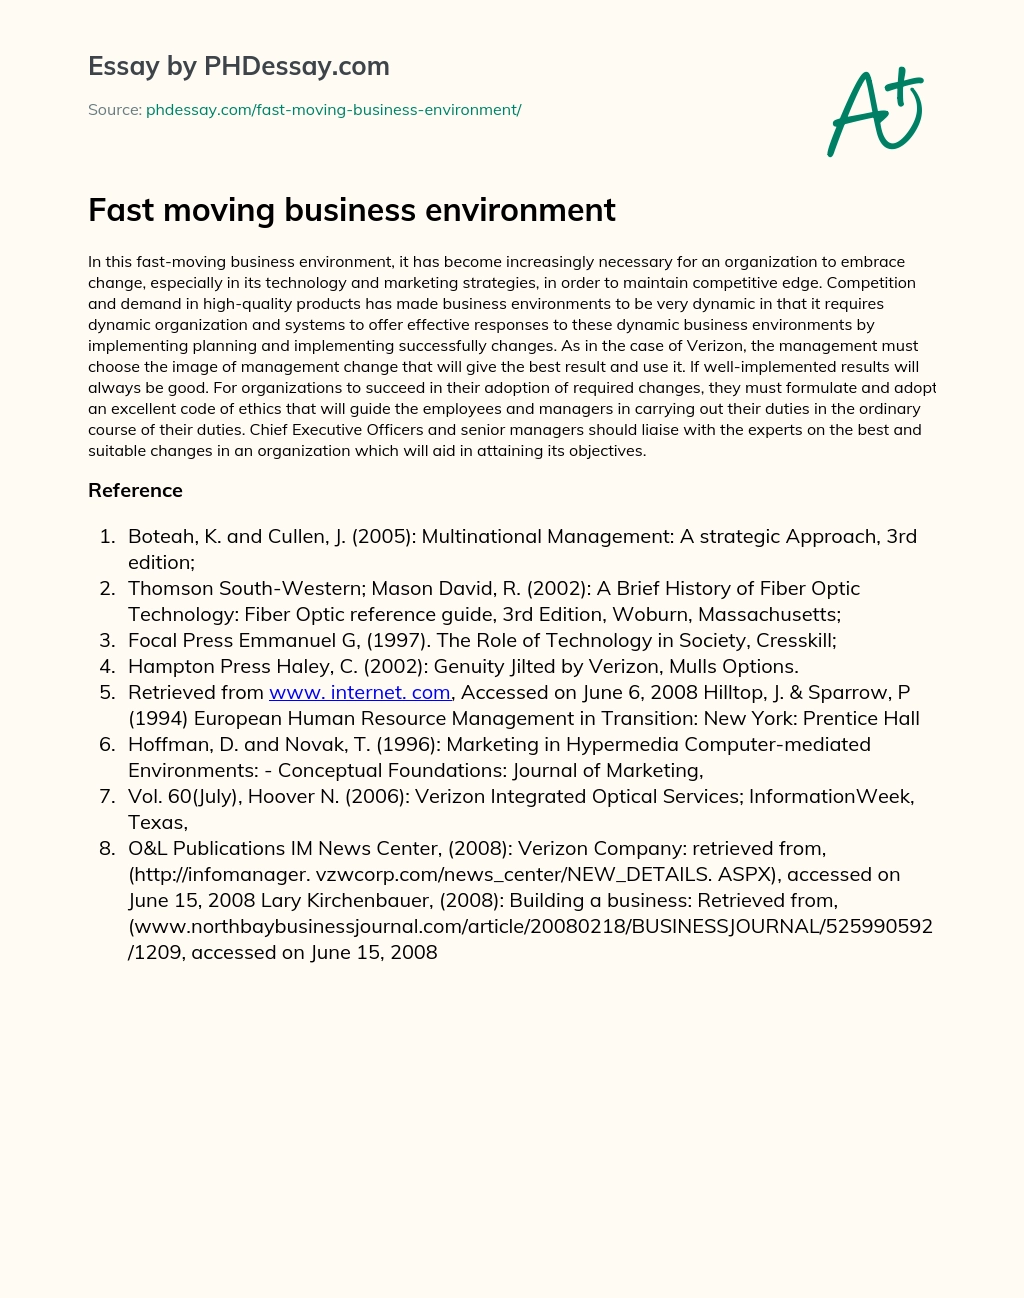 Fast moving business environment essay